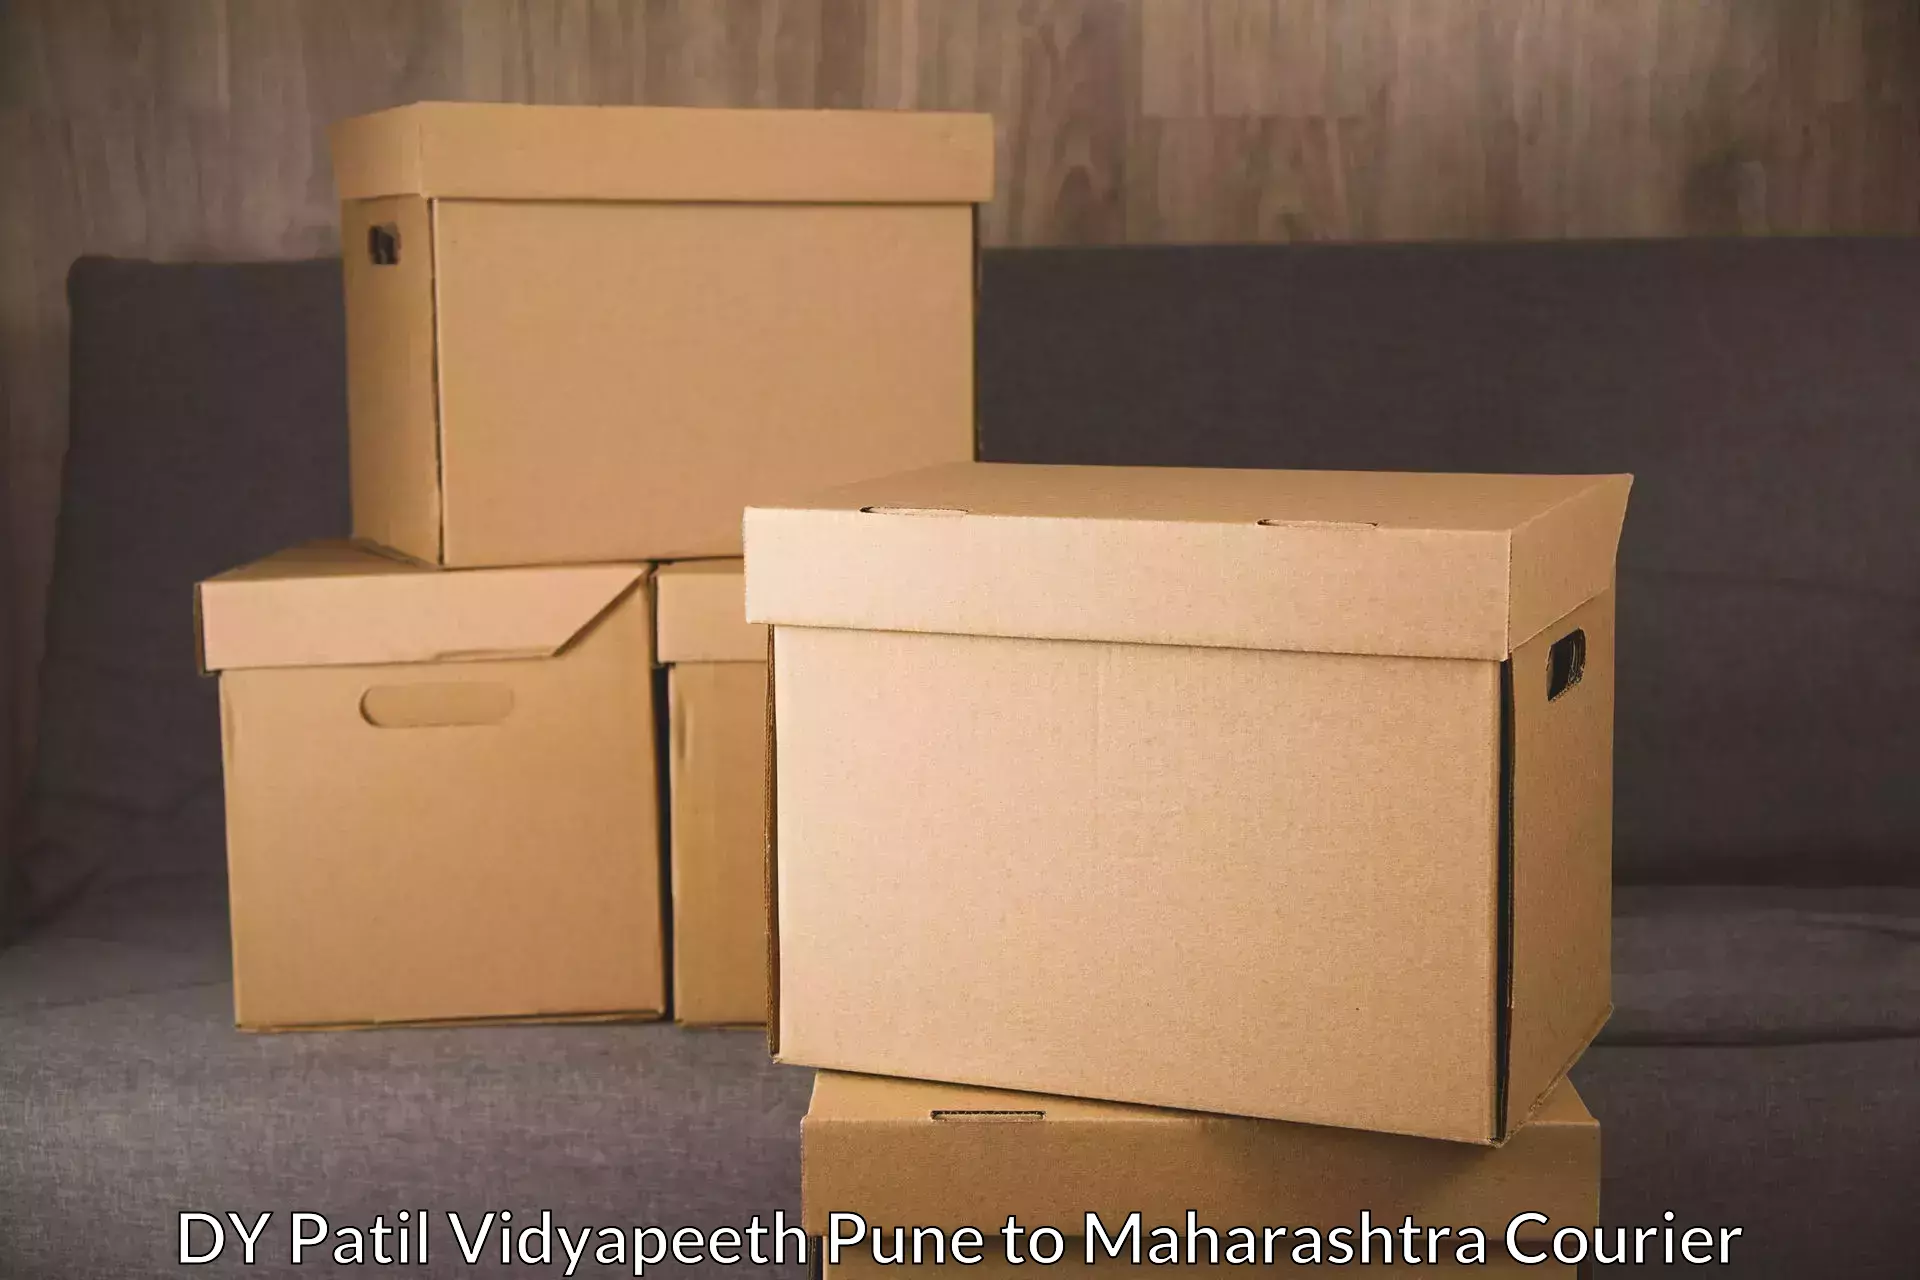 Reliable logistics providers DY Patil Vidyapeeth Pune to Kalbadevi